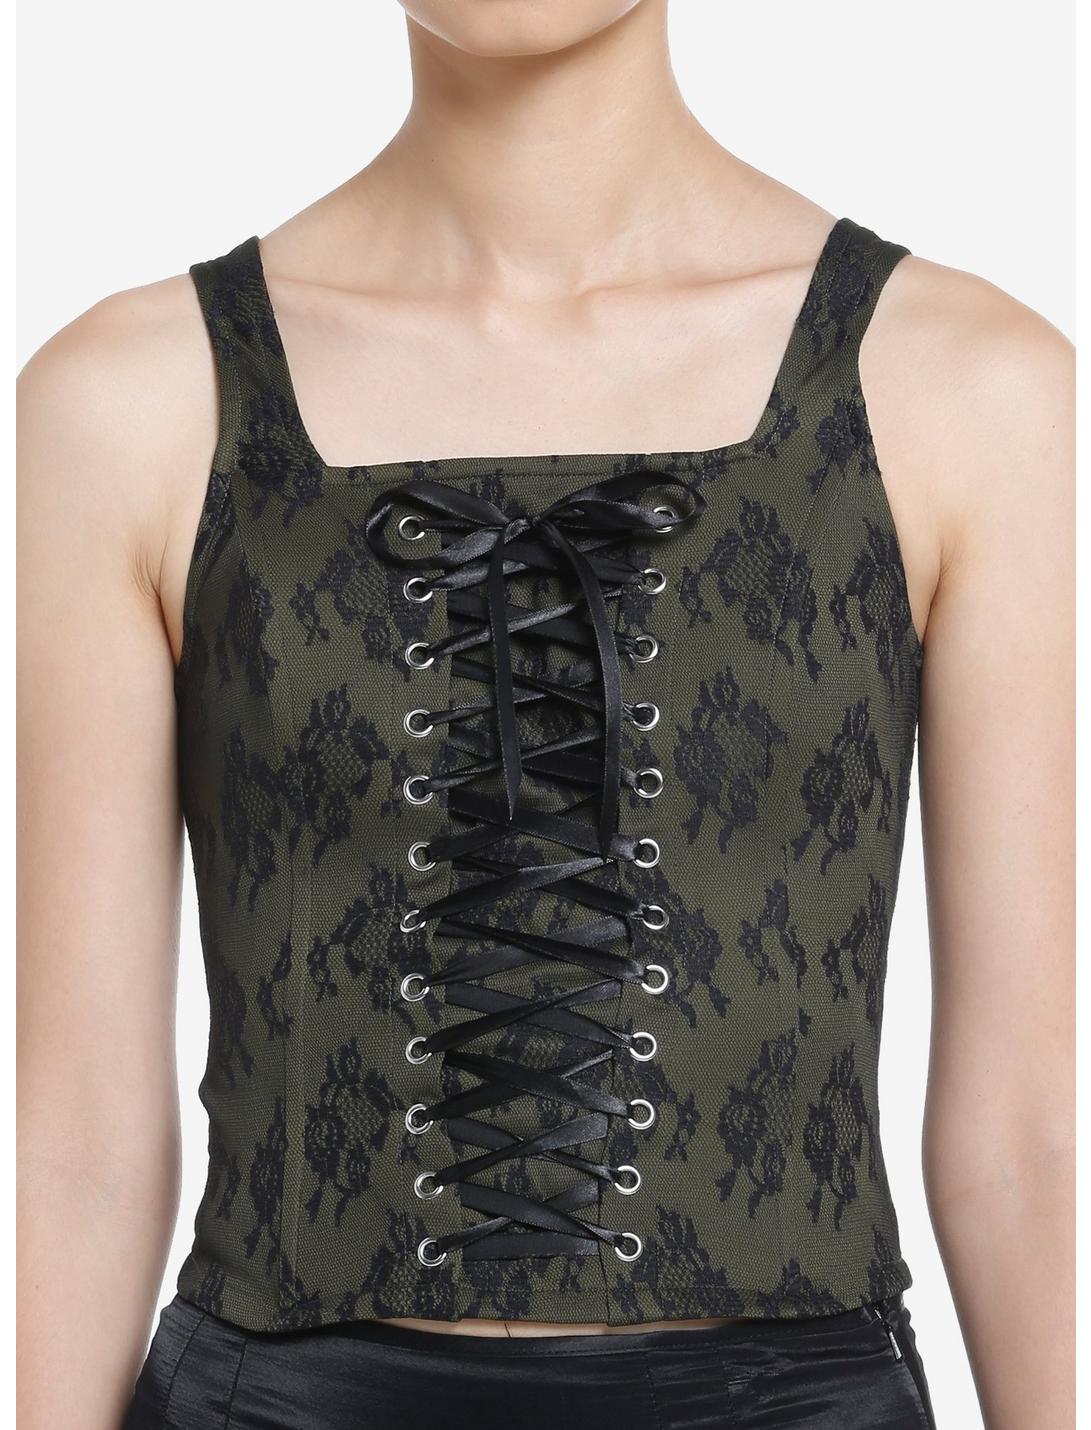 Thorn & Fable Green & Black Lace Girls Corset Top, BLACK, hi-res